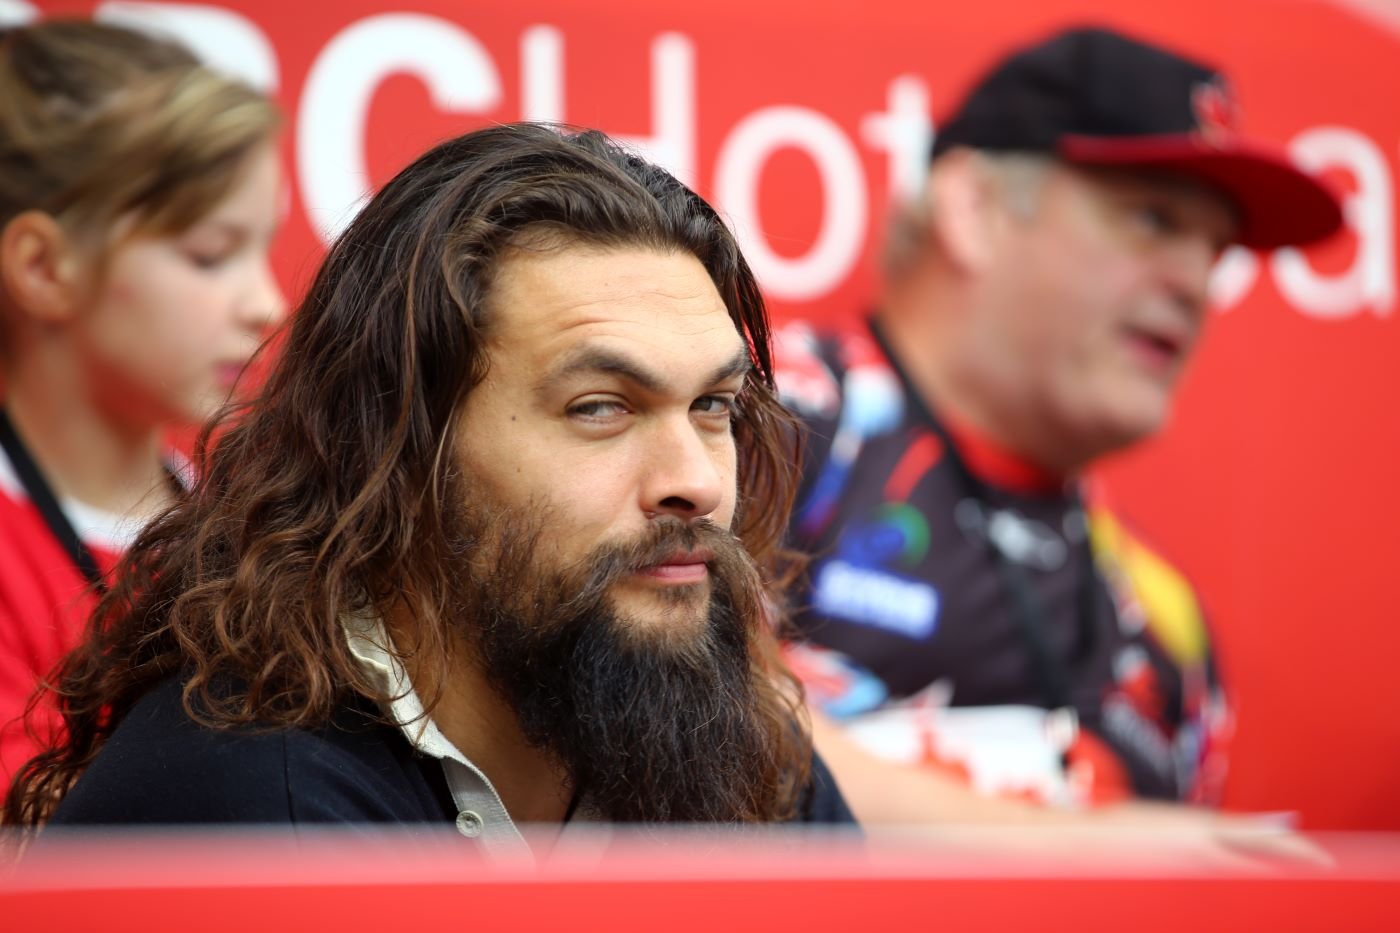 Jason Momoa wearing a black shirt with a white collar against a red background with a couple people blurred out in the background.